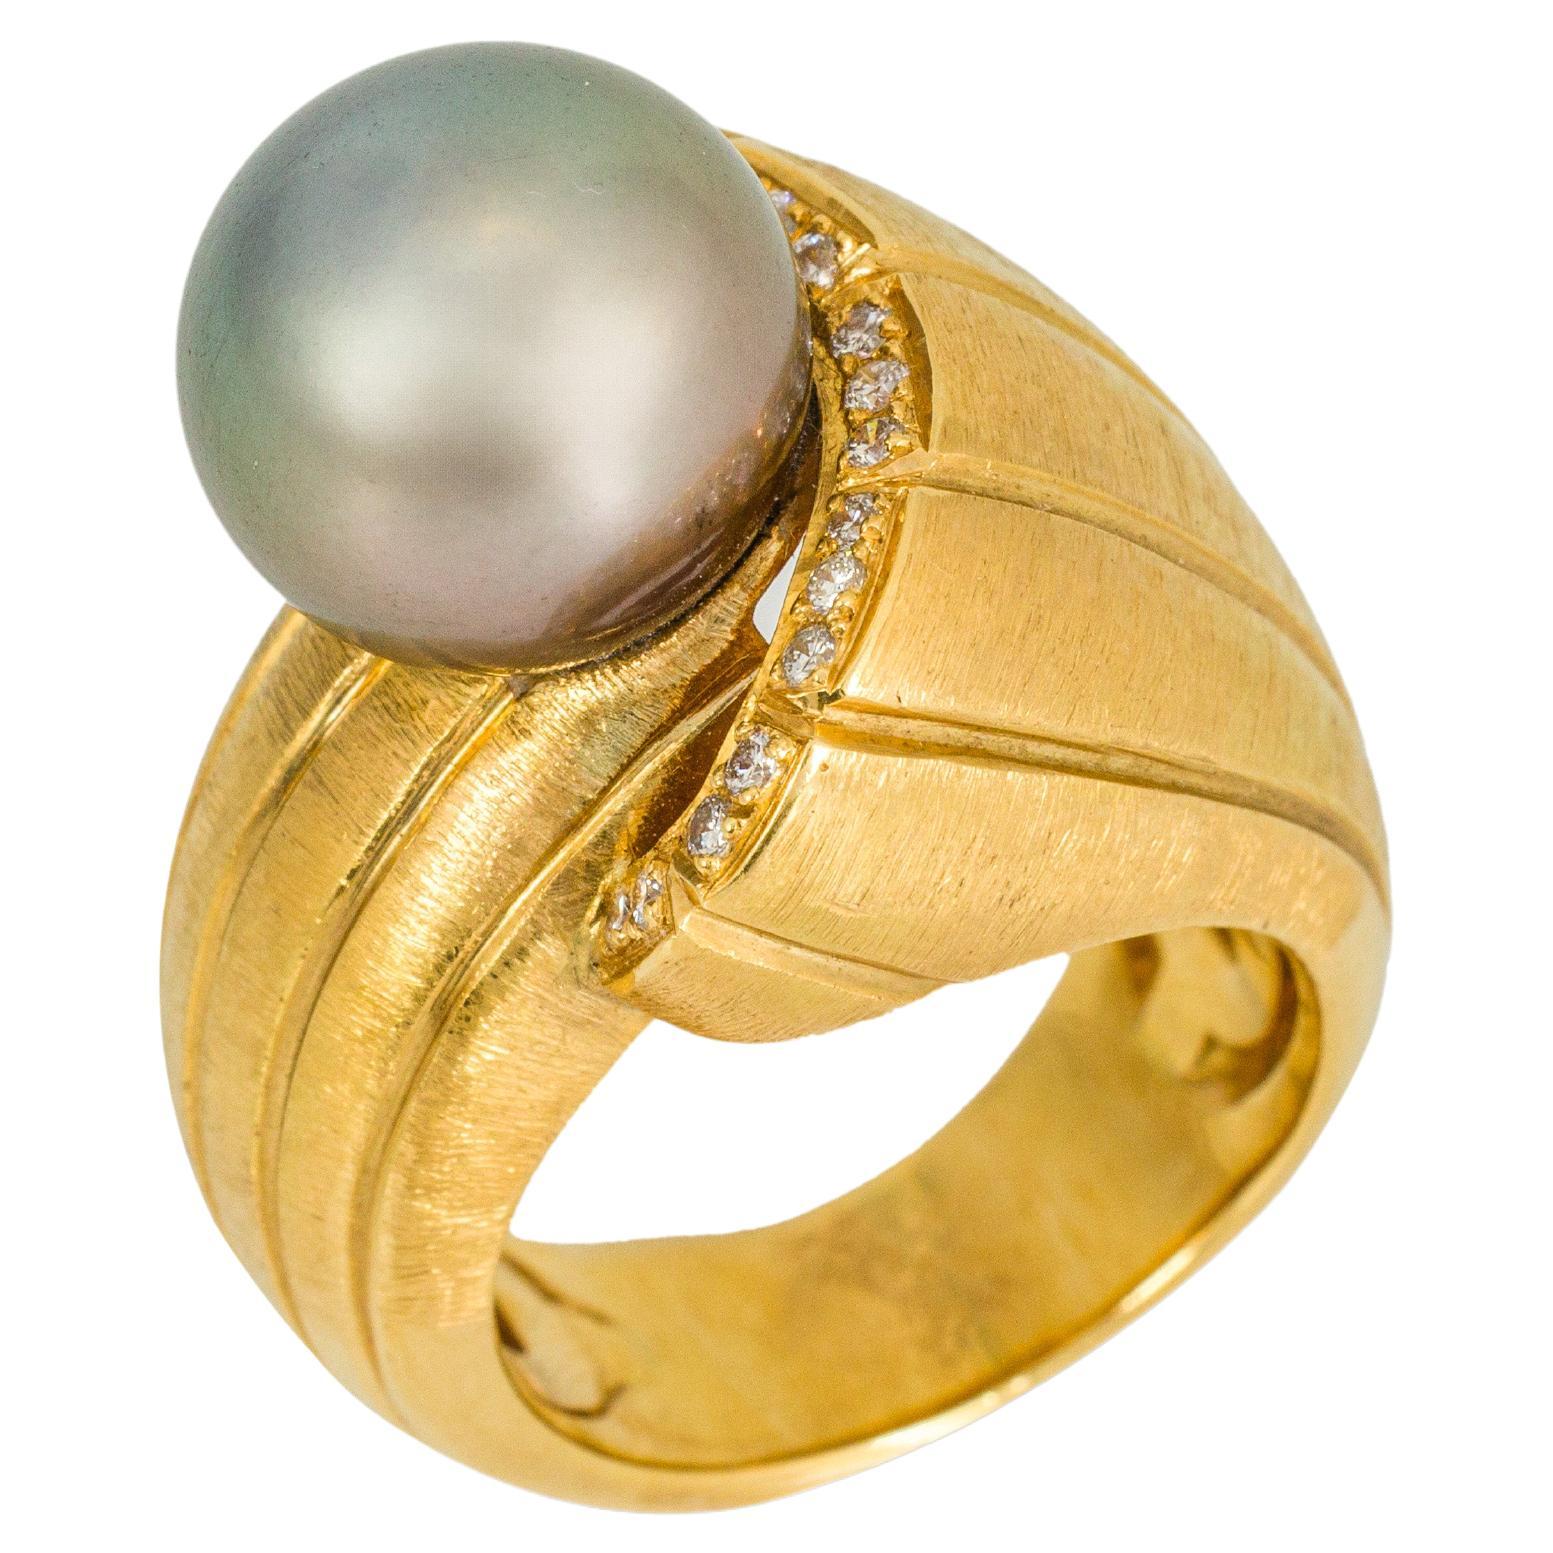 "Costis" Snail Shell Ring with South Sea Gray Pearl of 12.50 mm and Diamonds For Sale